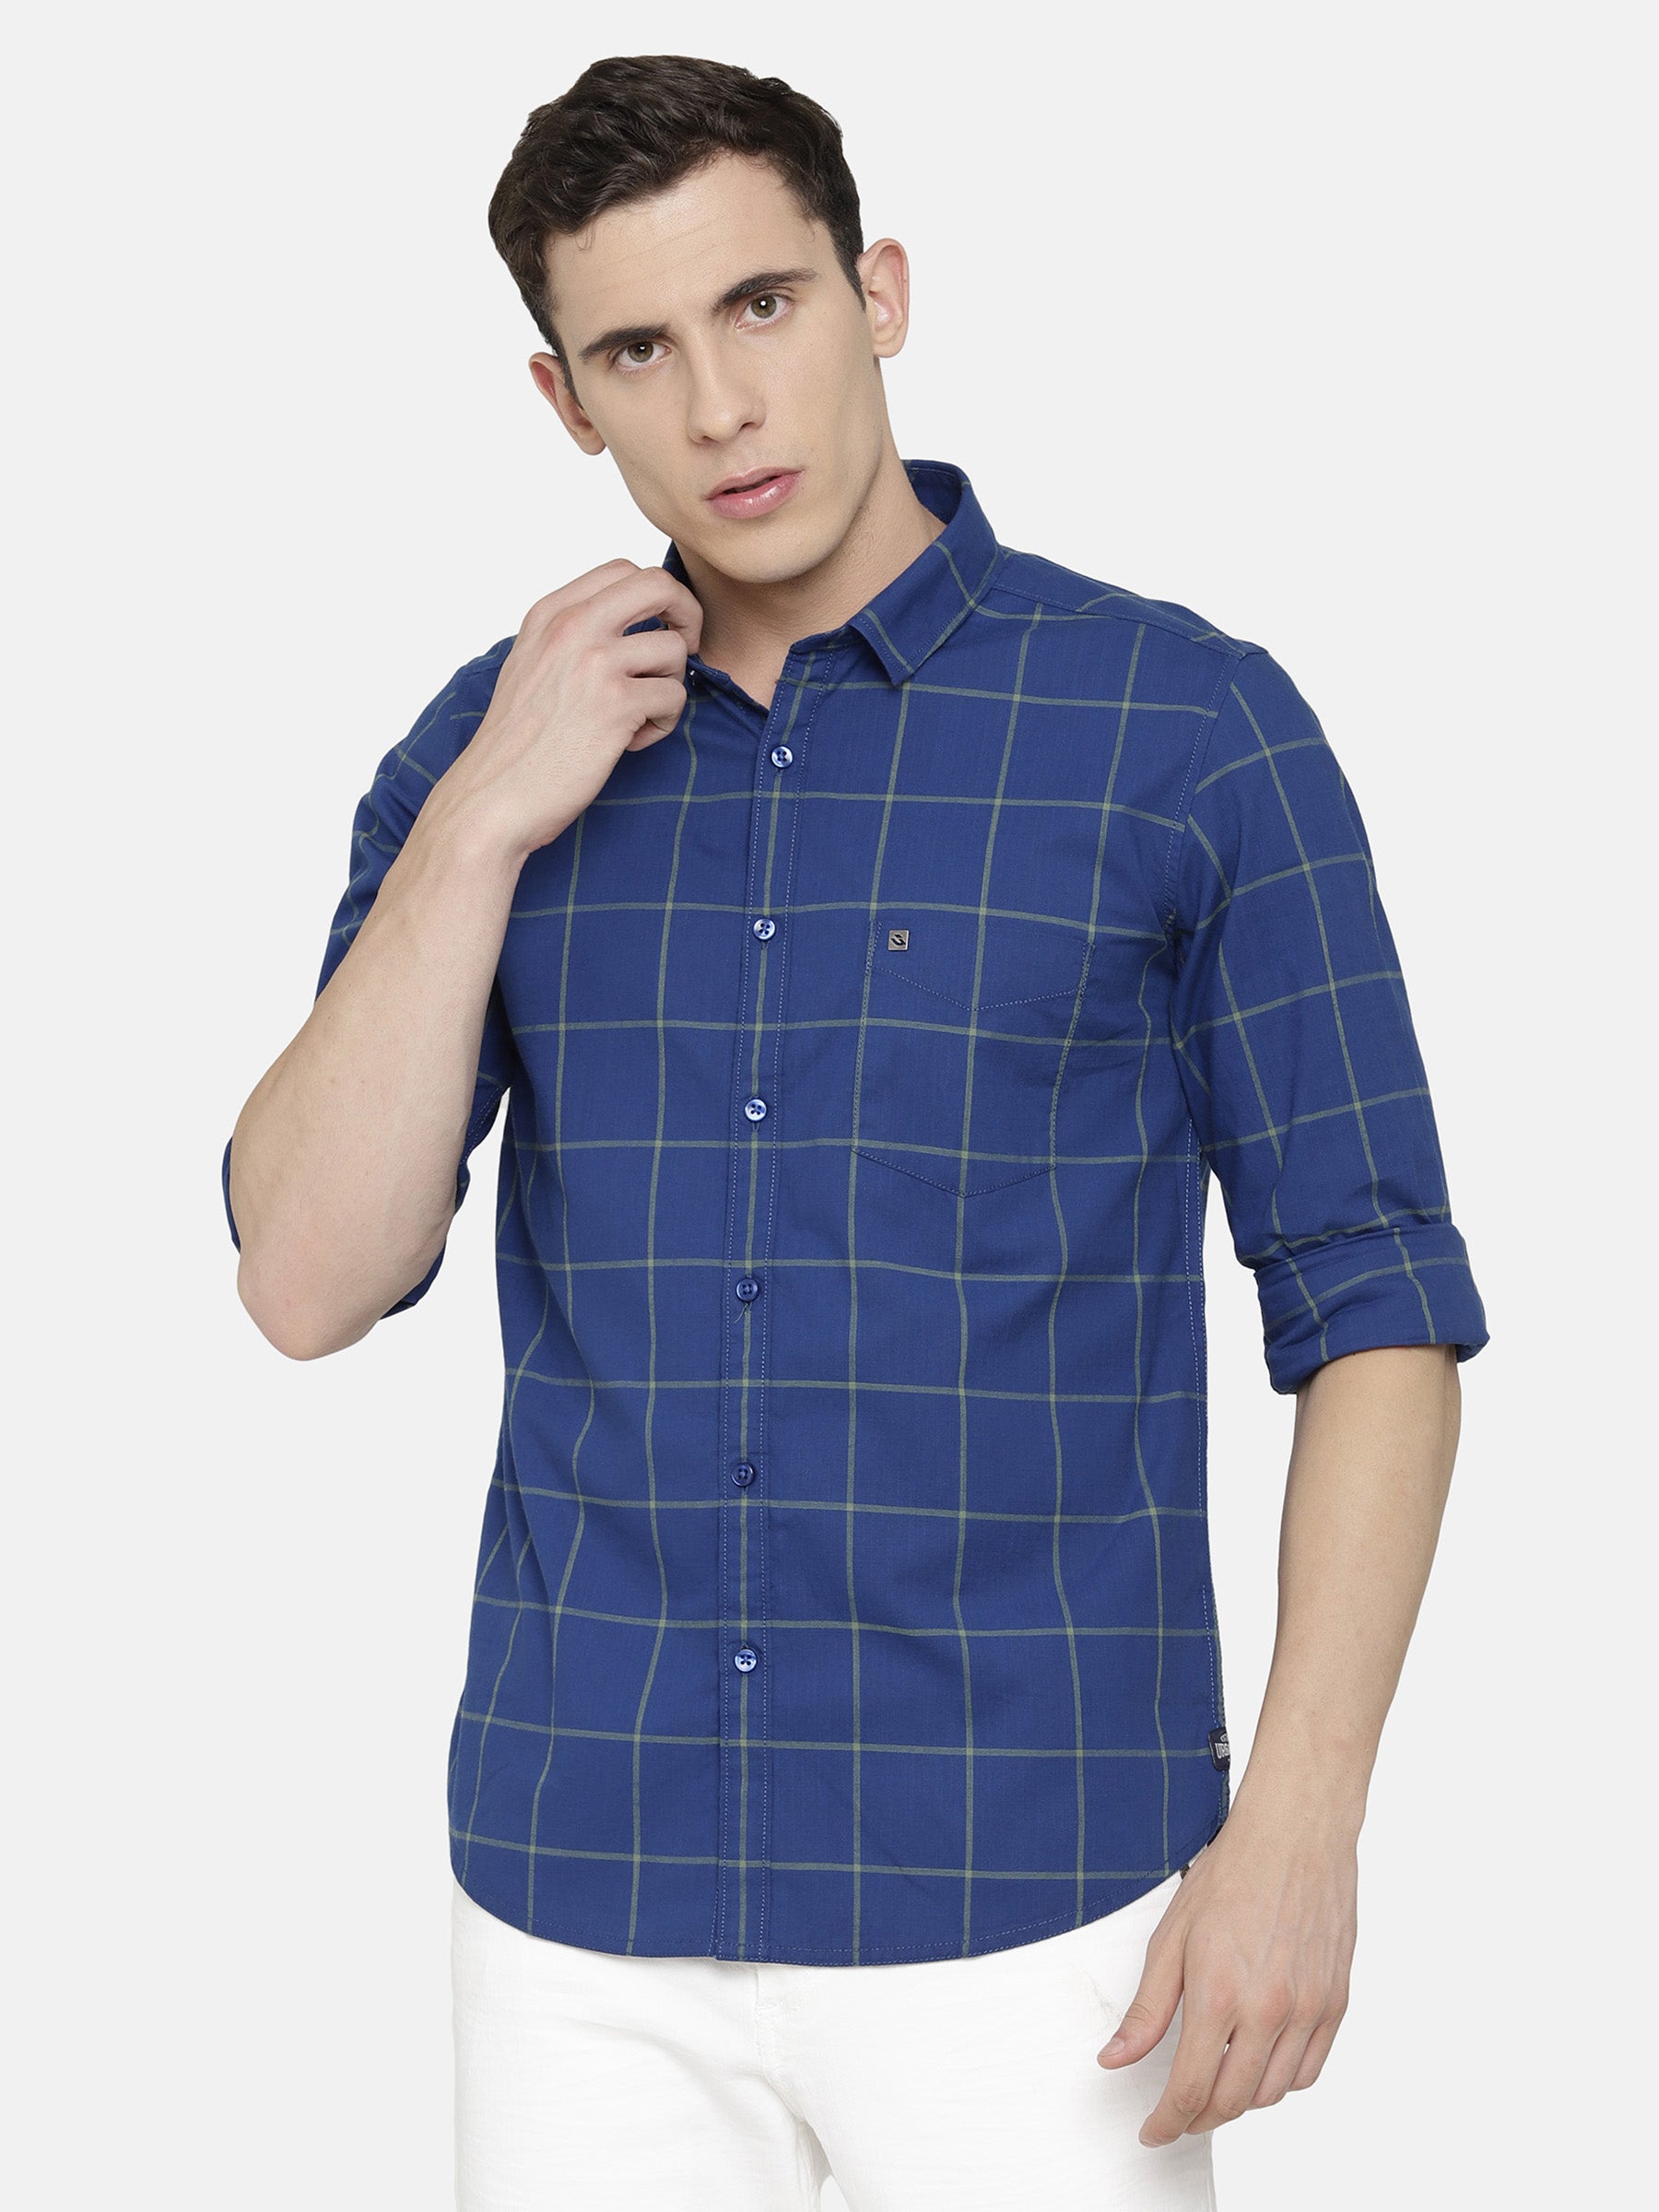 Buy Mens Clothing Online  Shirts  TShirts  Pants  Trousers Online at  Best Price India Cottonworldnet